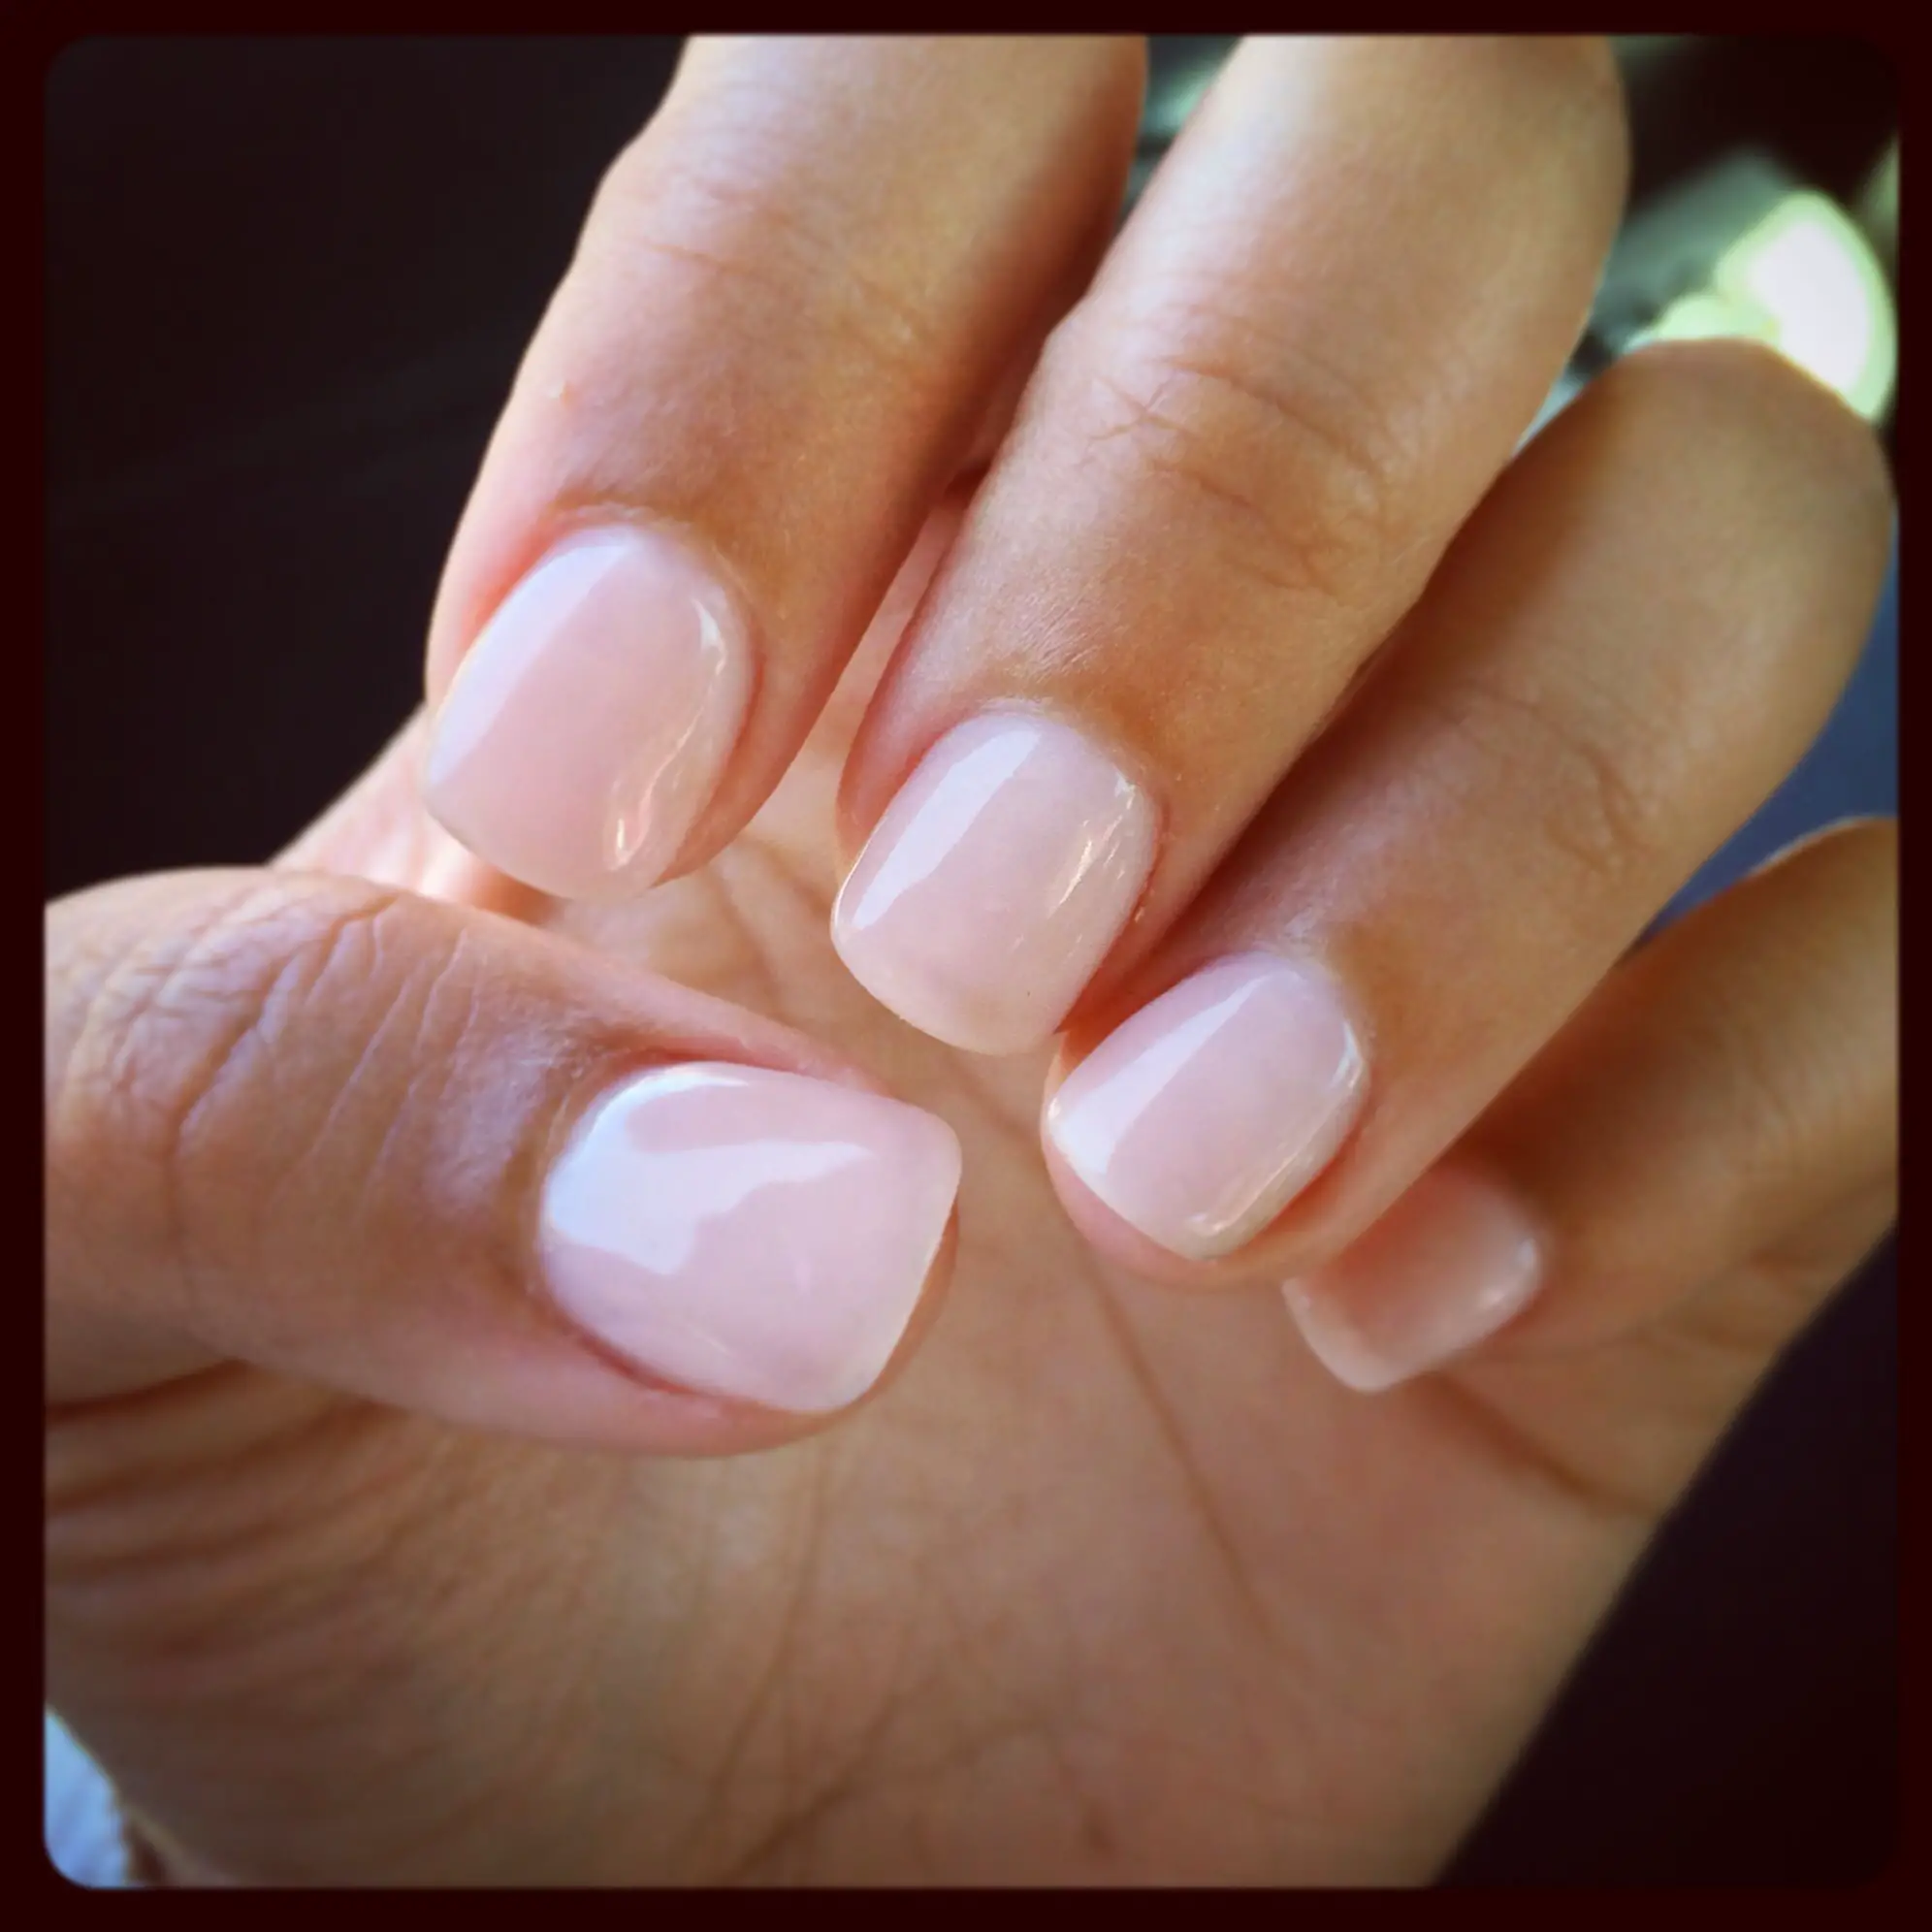 So happy! Got exactly what I wanted...Natural nails, acrylic with gel ...